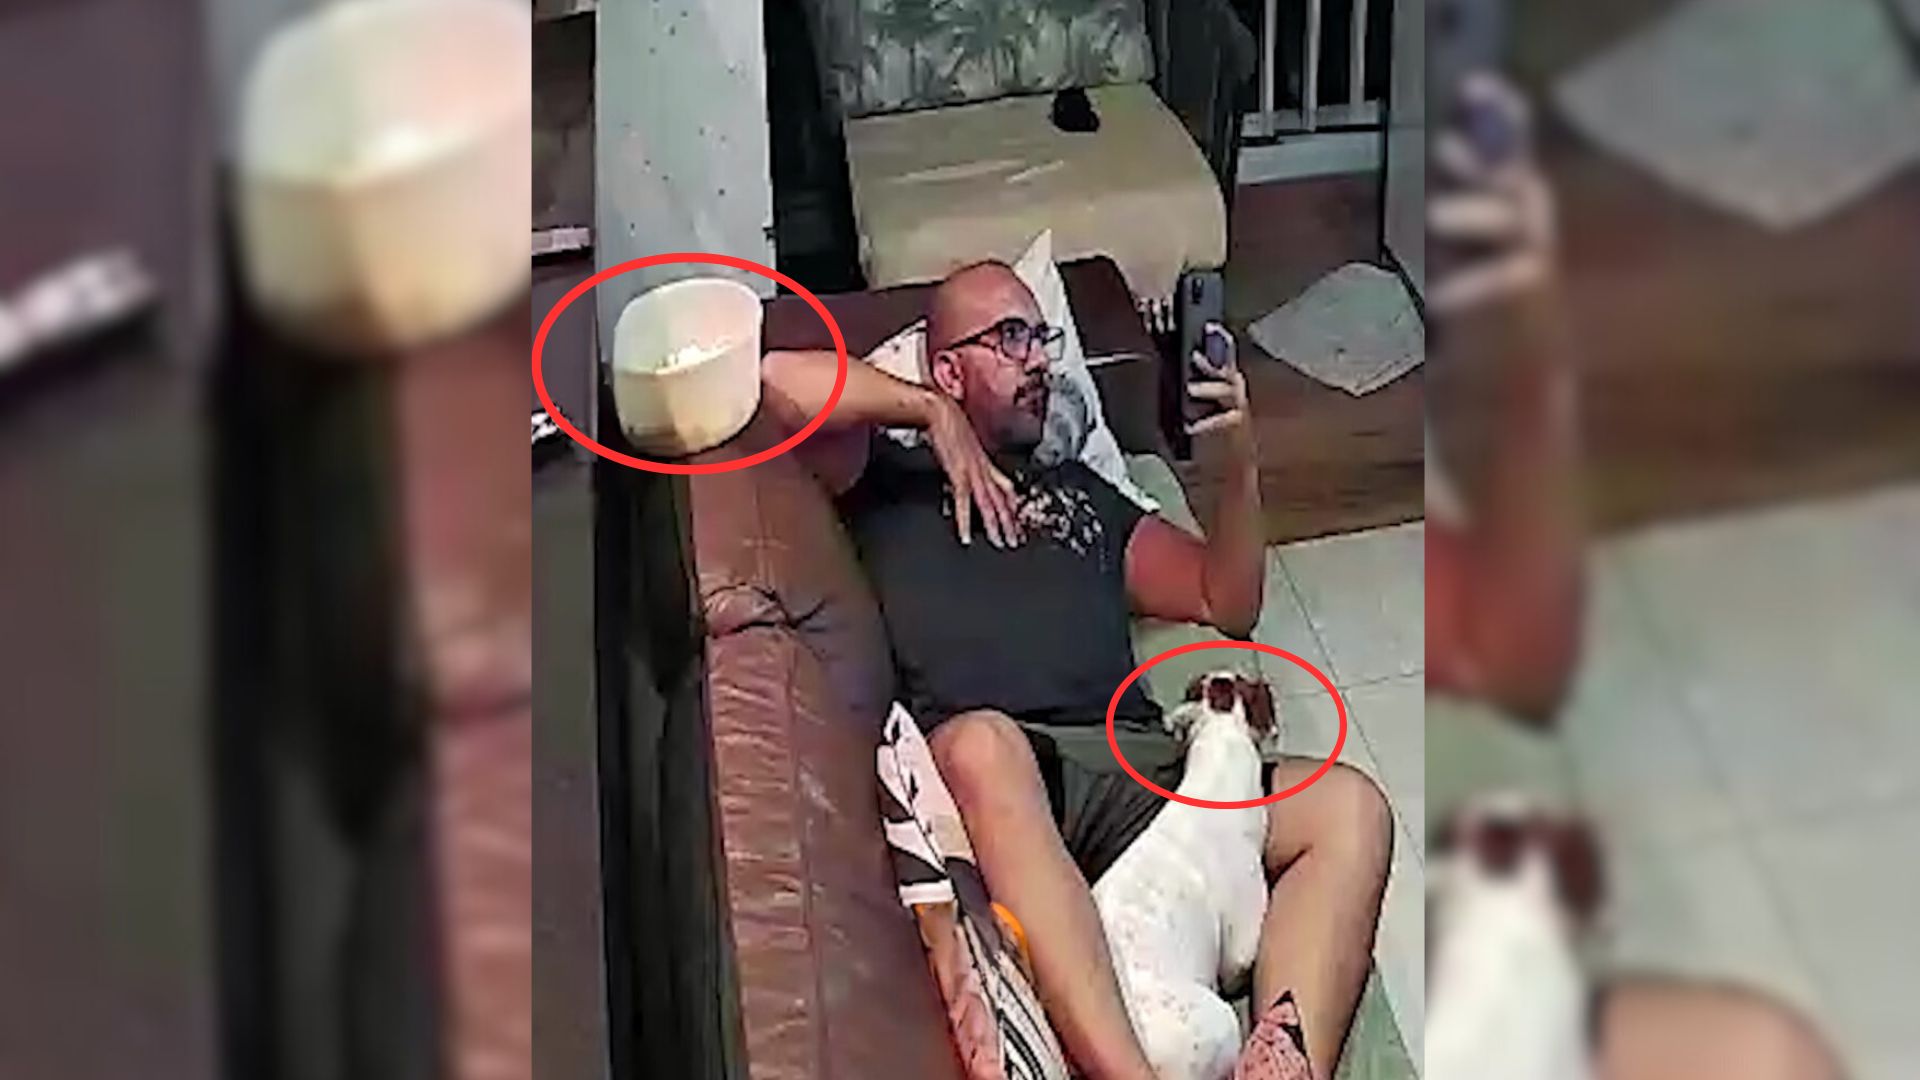 Witness This Dog’s Funny Reaction When His Dad Starts Secretly Grabbing Snacks